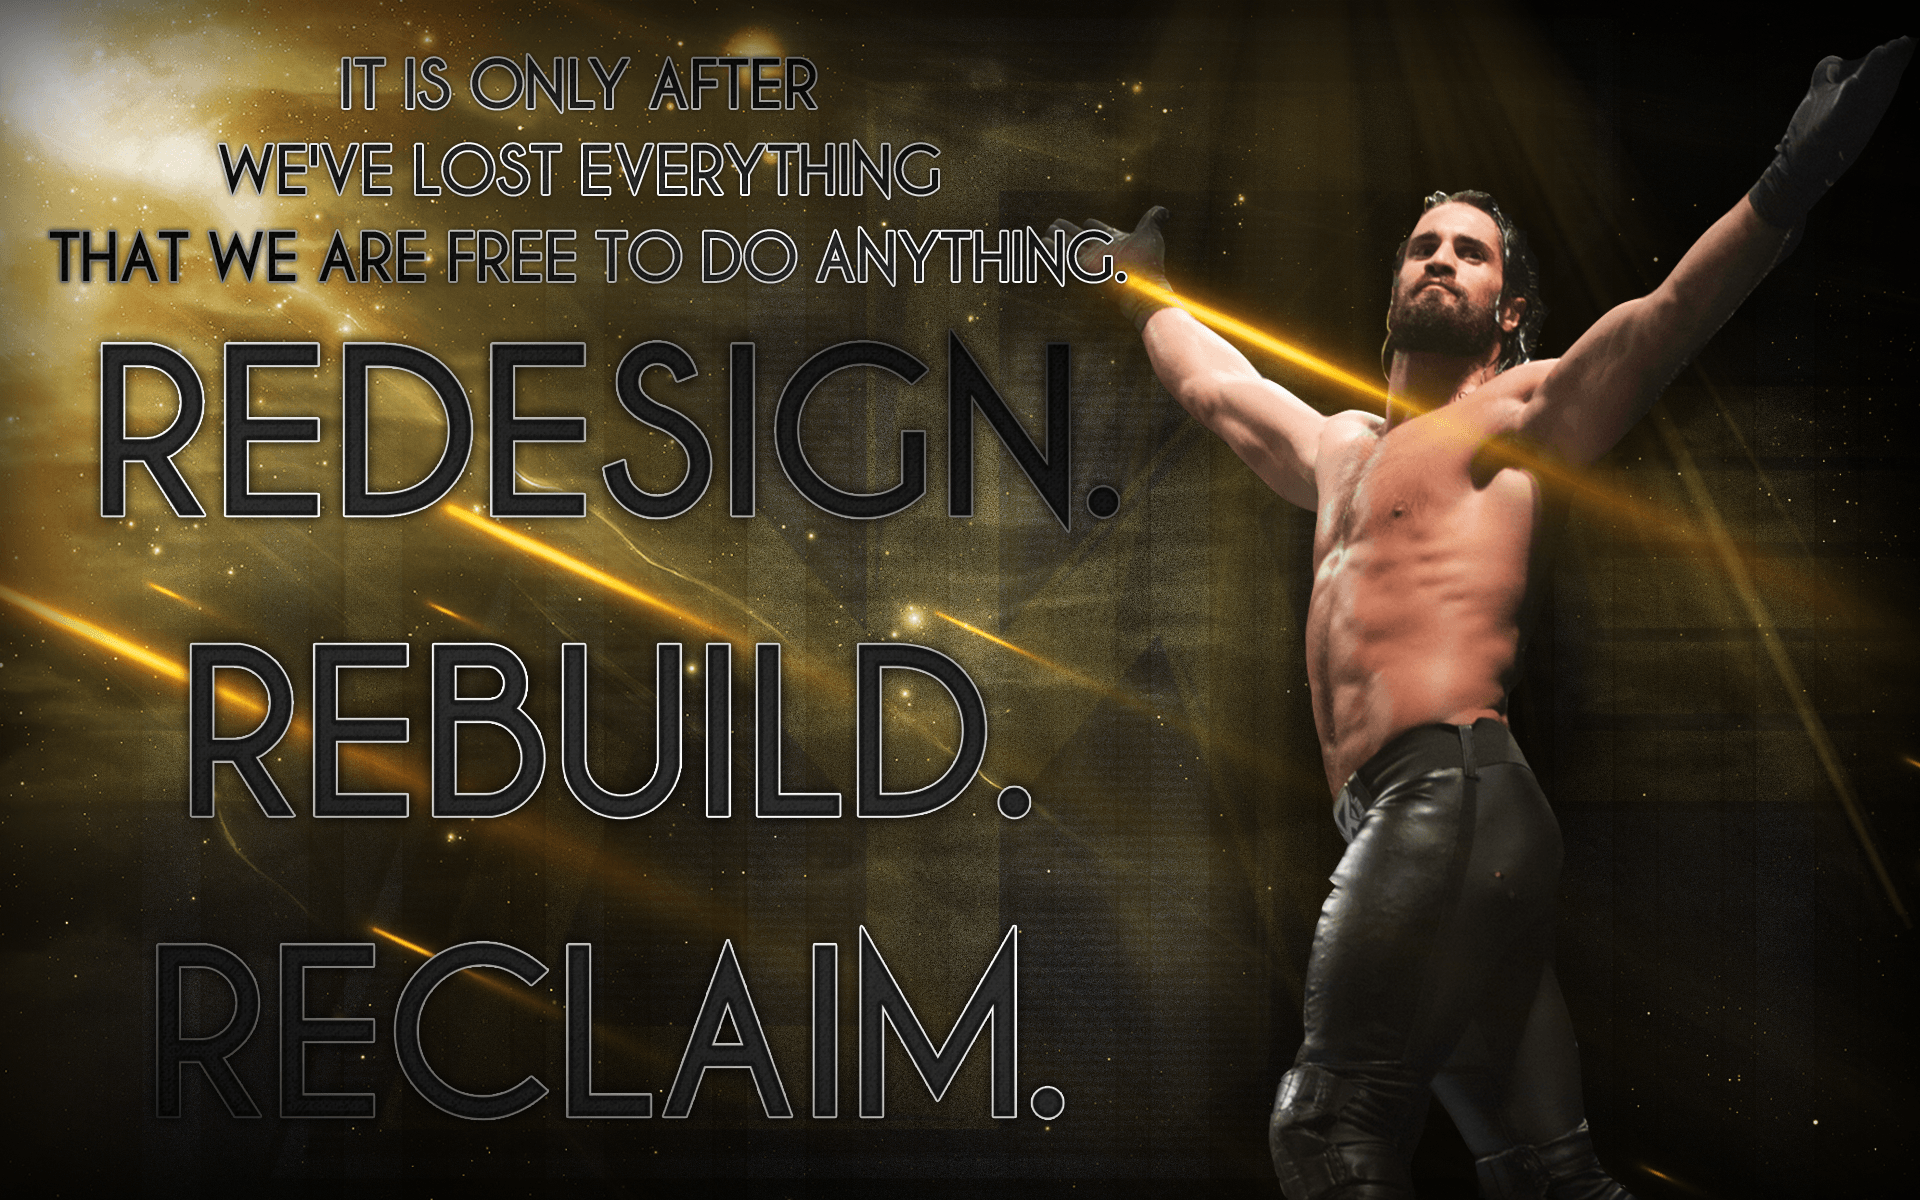 WWE Seth Rollins Wallpapers - Wallpaper Cave
